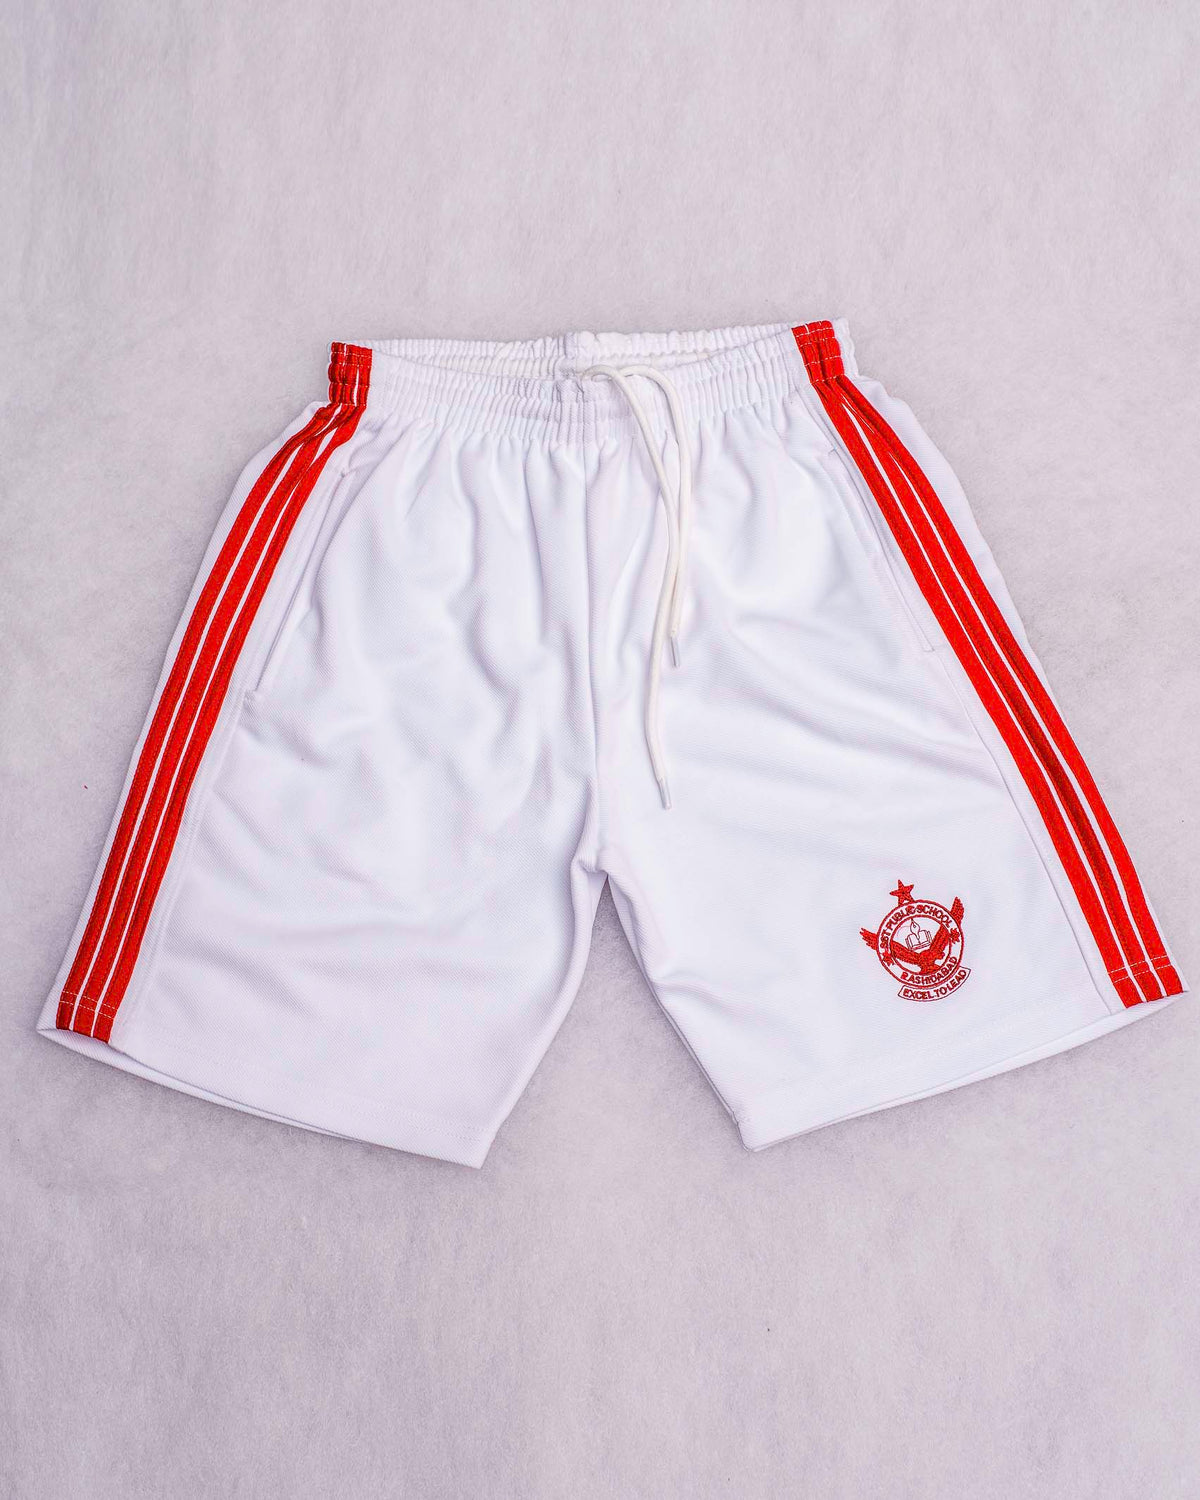 white & red shorts